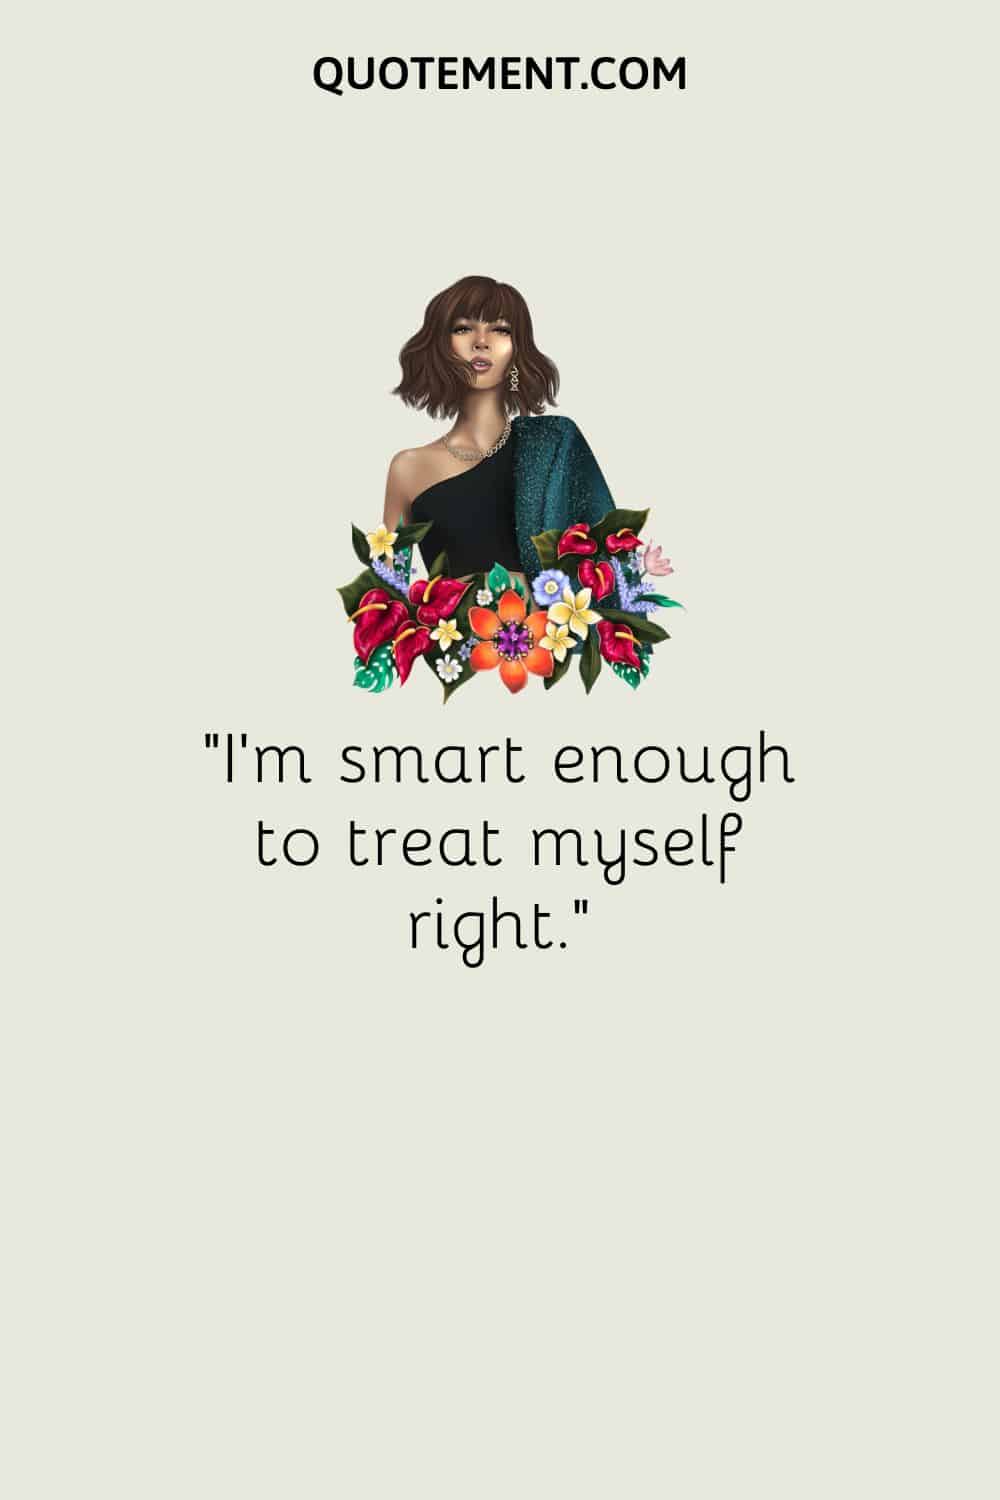 “I’m smart enough to treat myself right.“